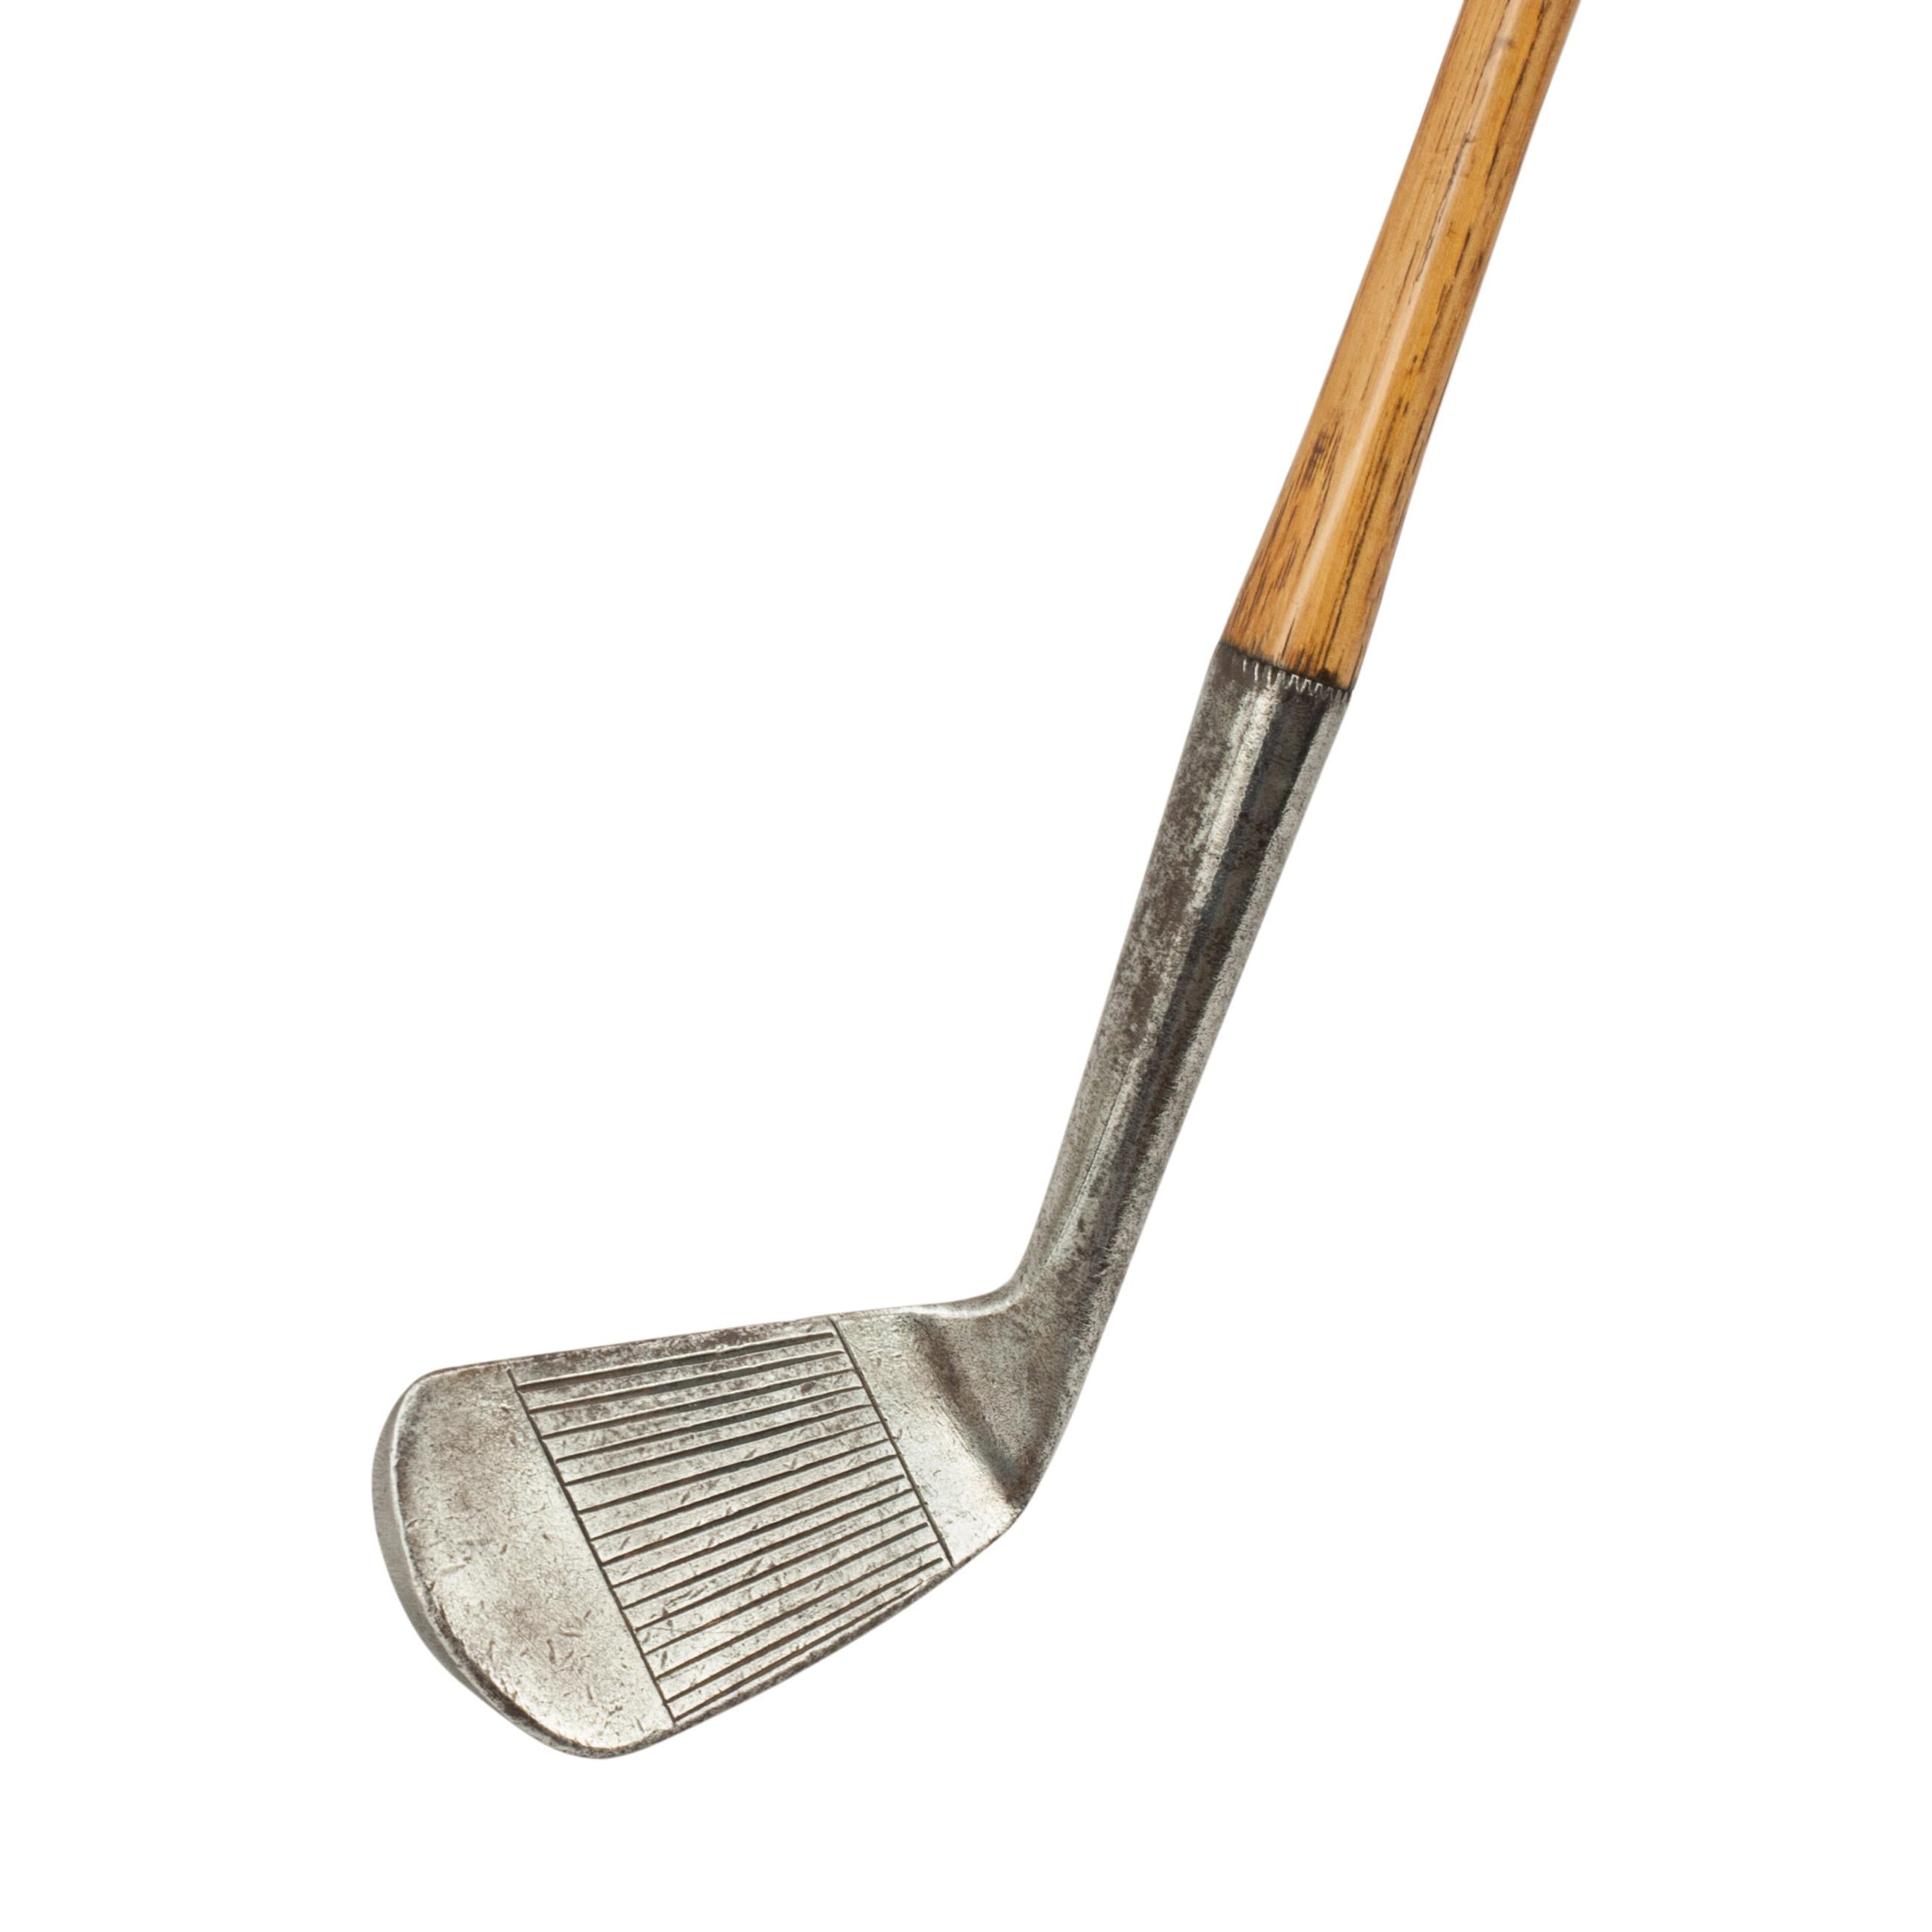 Vintage Hickory Golf Club, Mashie, by Tom Stewart, St Andrews.
A fine and nicely weighted line faced mashie by Tom Stewart of St. Andrews. The hickory shaft with polished leather grip with the rear of the club head marked with Stewart's 'PIPE'